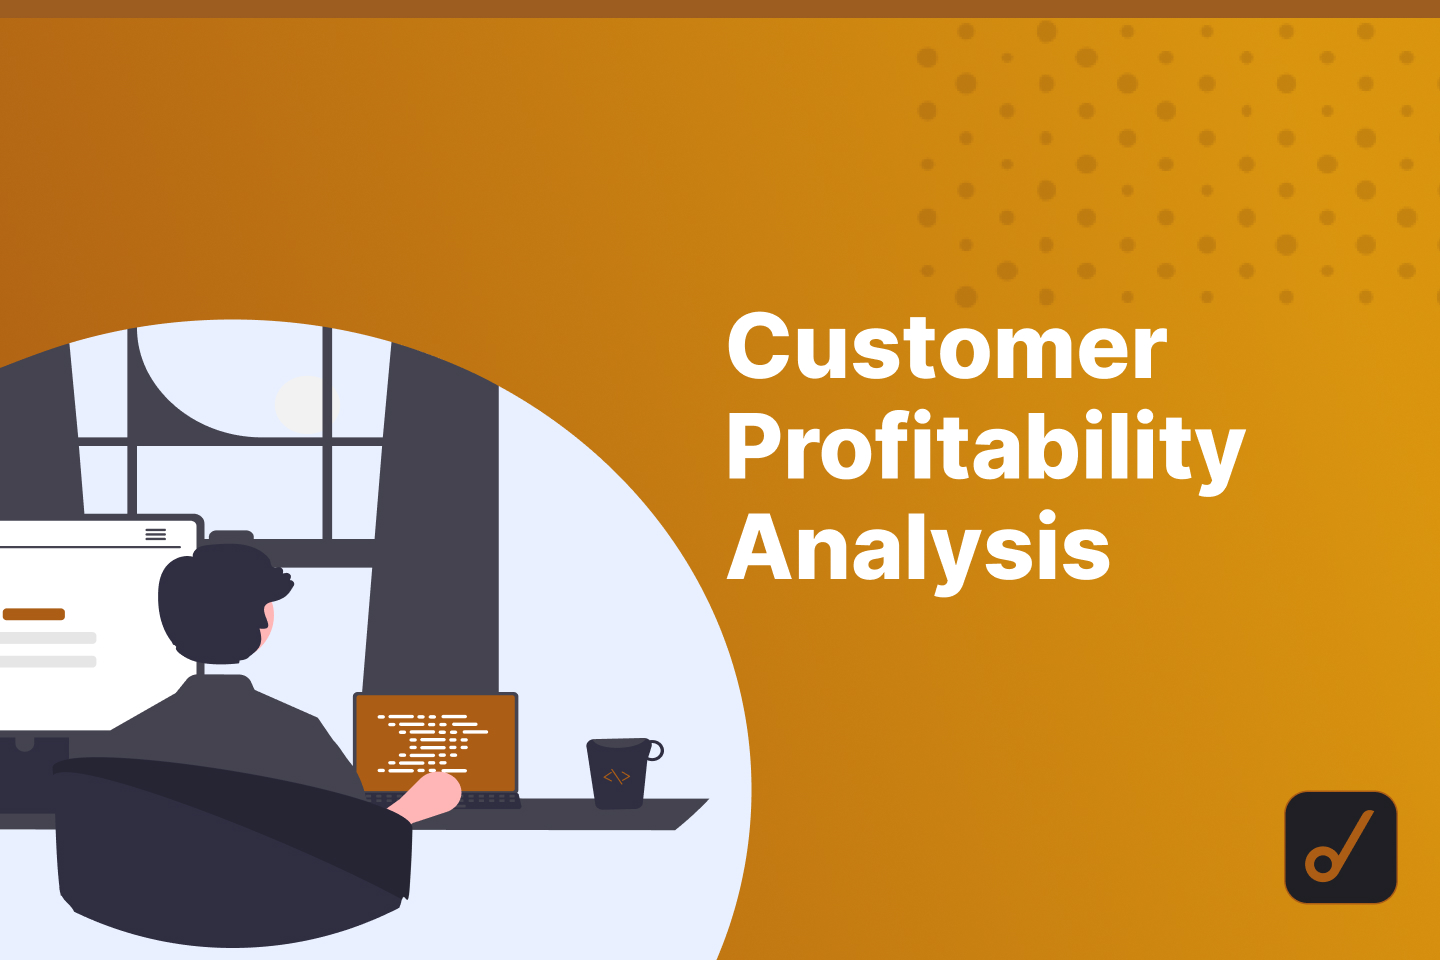 Customer Profitability Analysis: Definition, Benefits, and Challenges